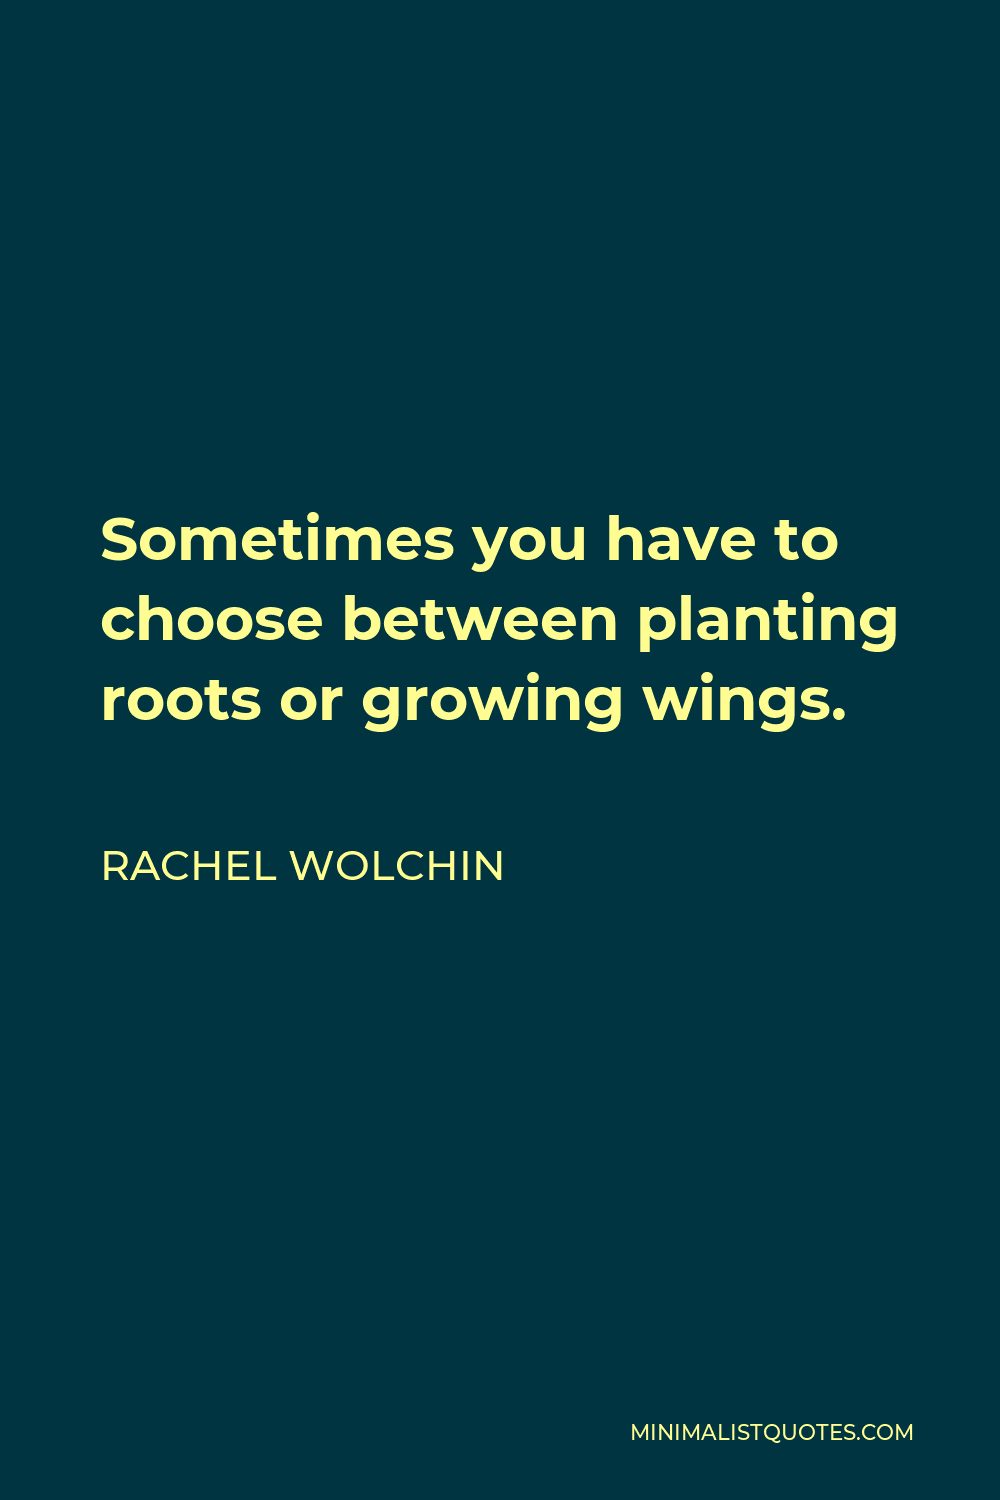 Rachel Wolchin Quote - Sometimes you have to choose between planting roots or growing wings.